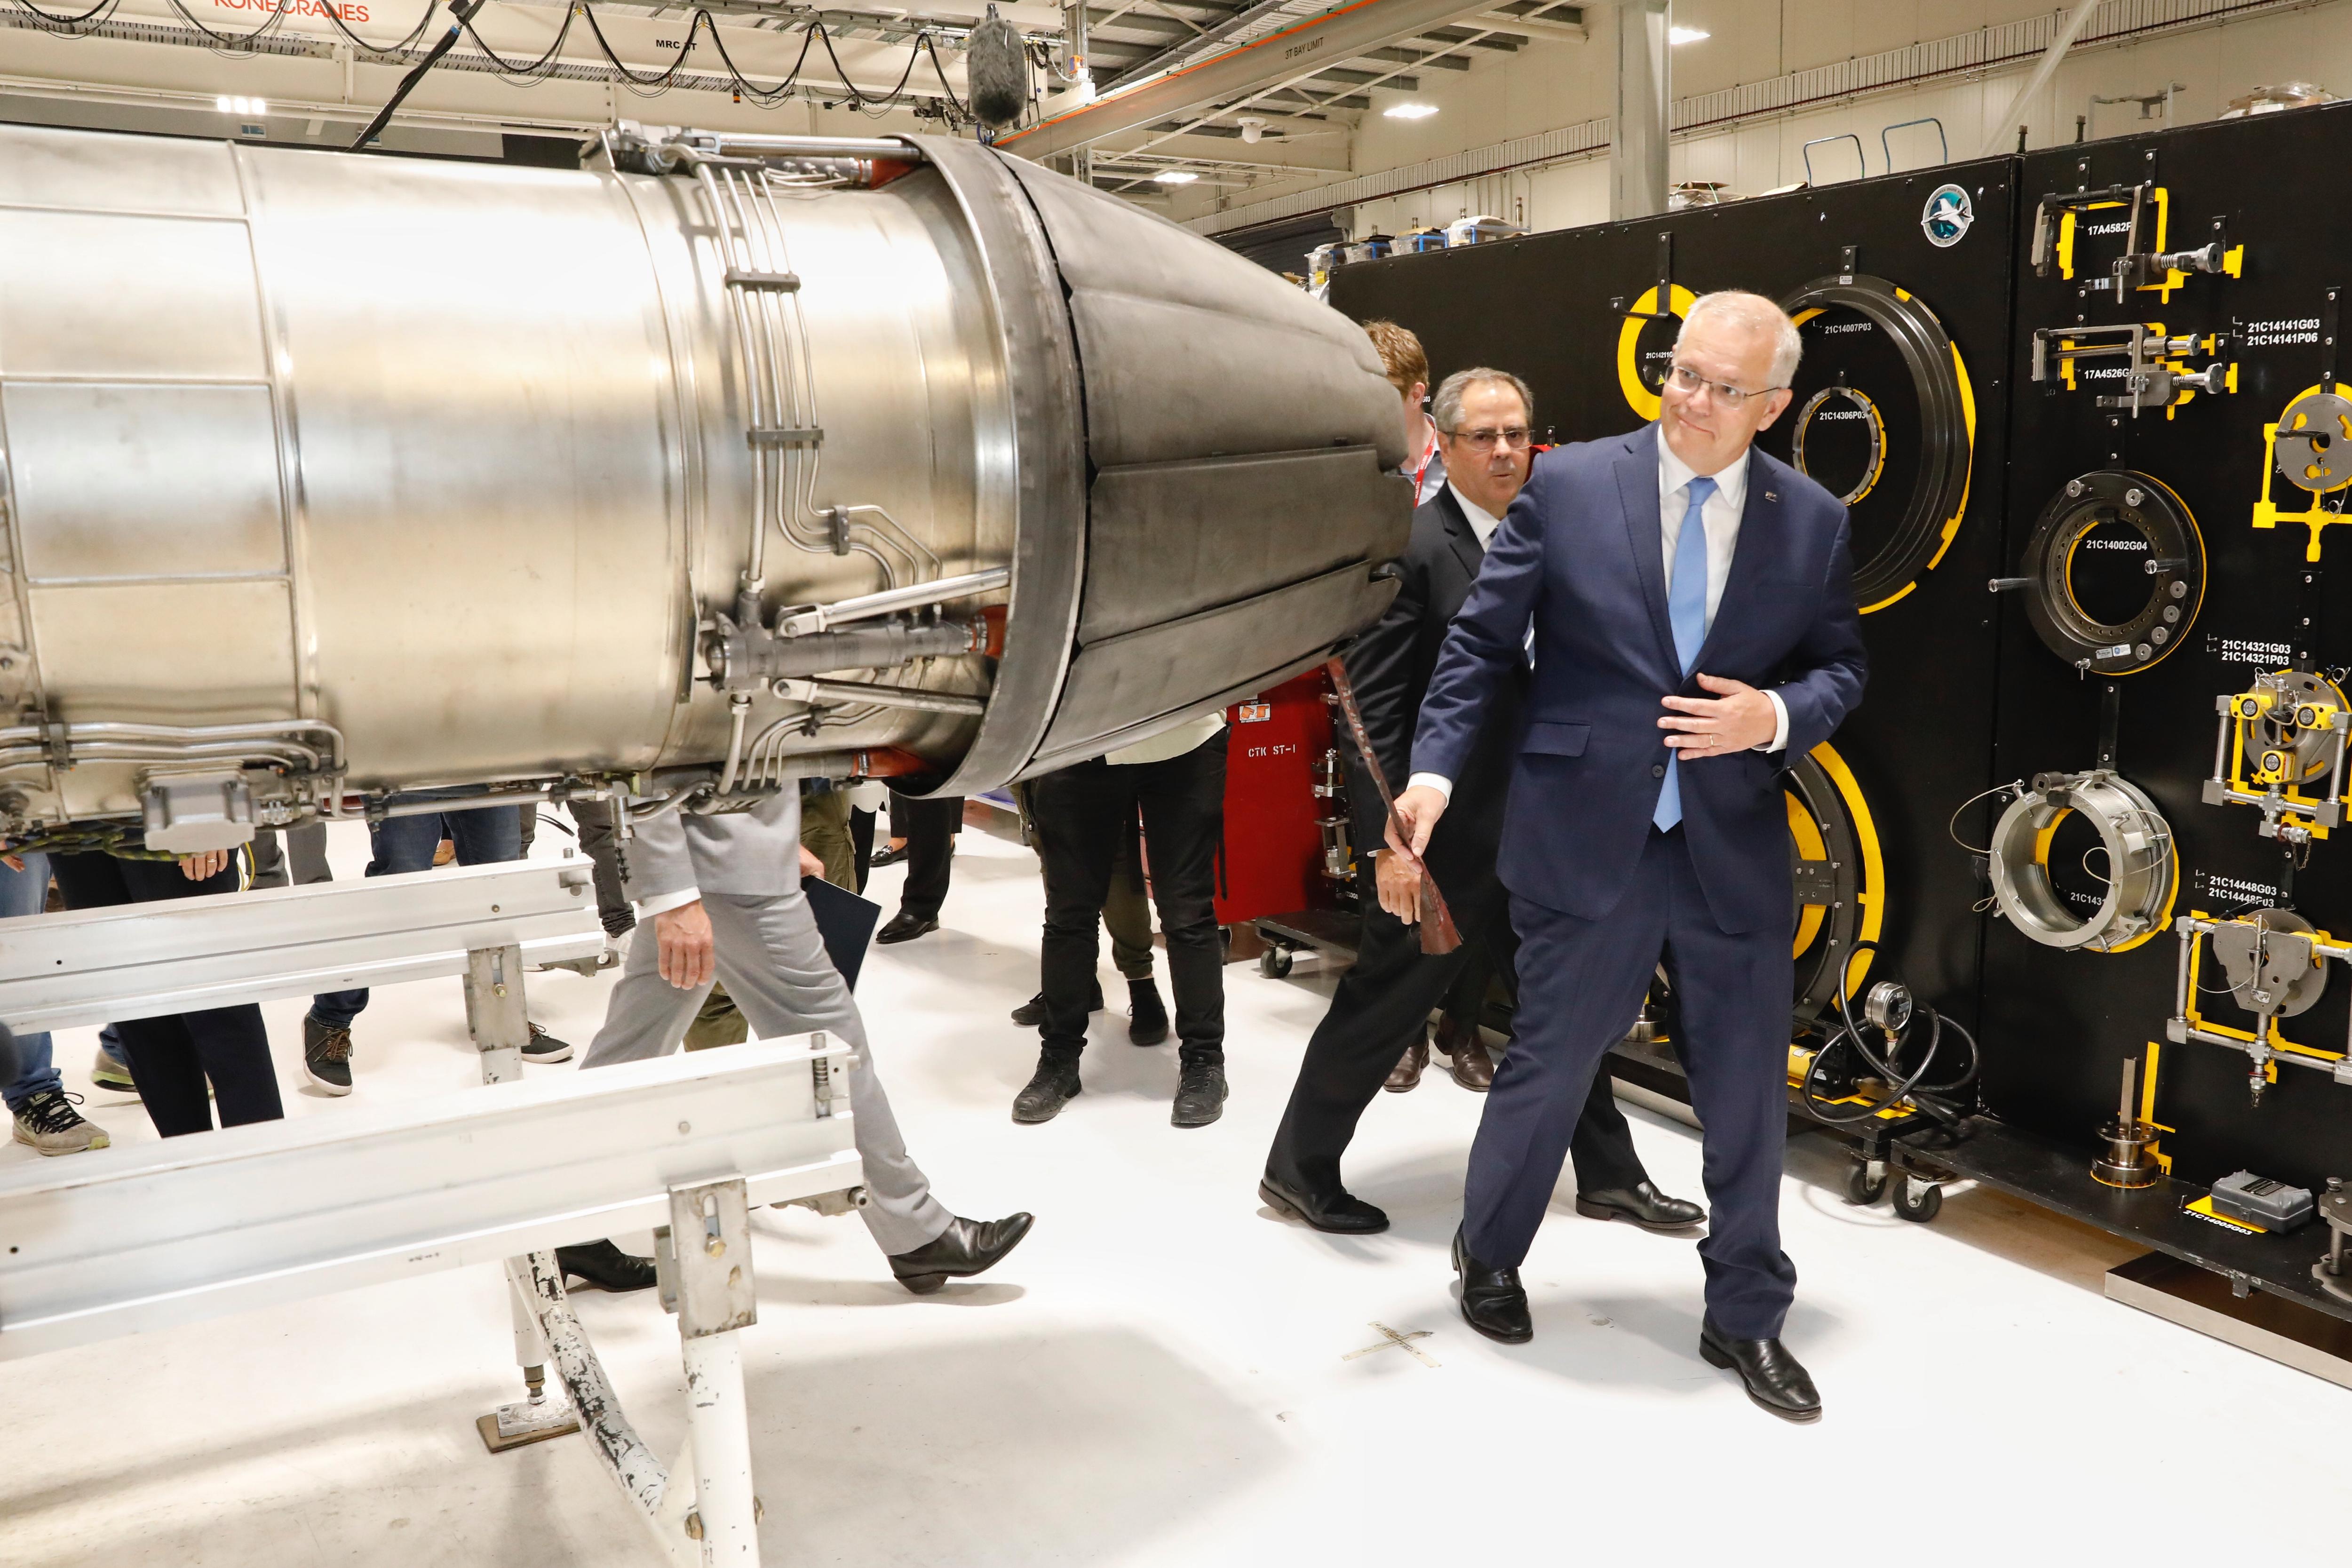 A man in a suit dodges around a piece of machinery shaped like a missle